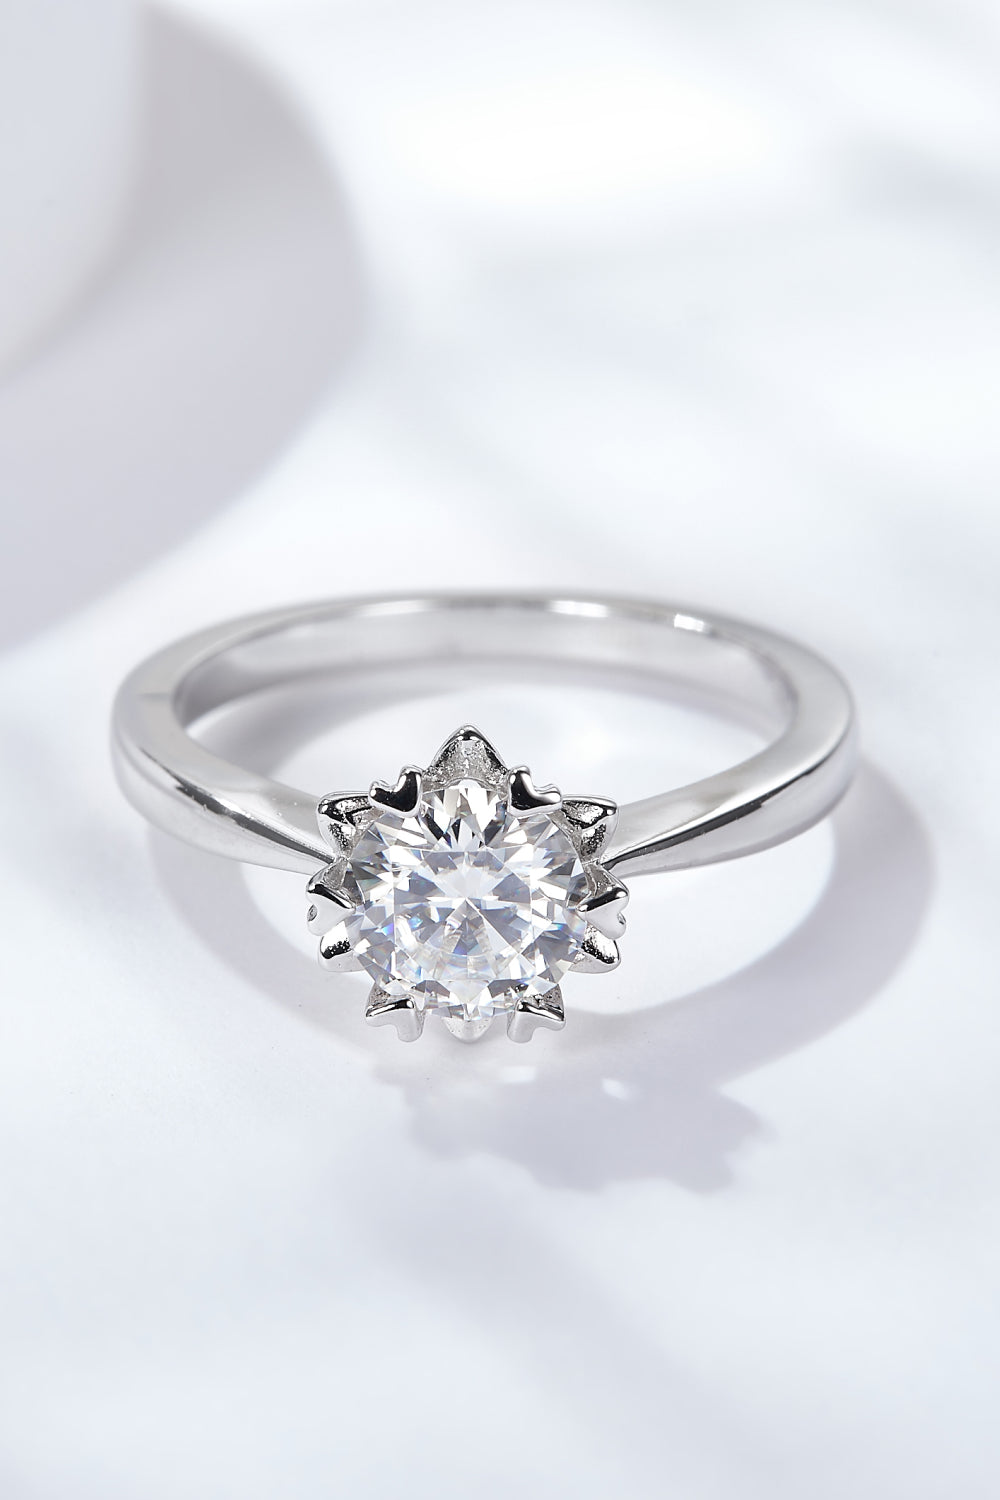 Solitaire Moissanite Ring Image1